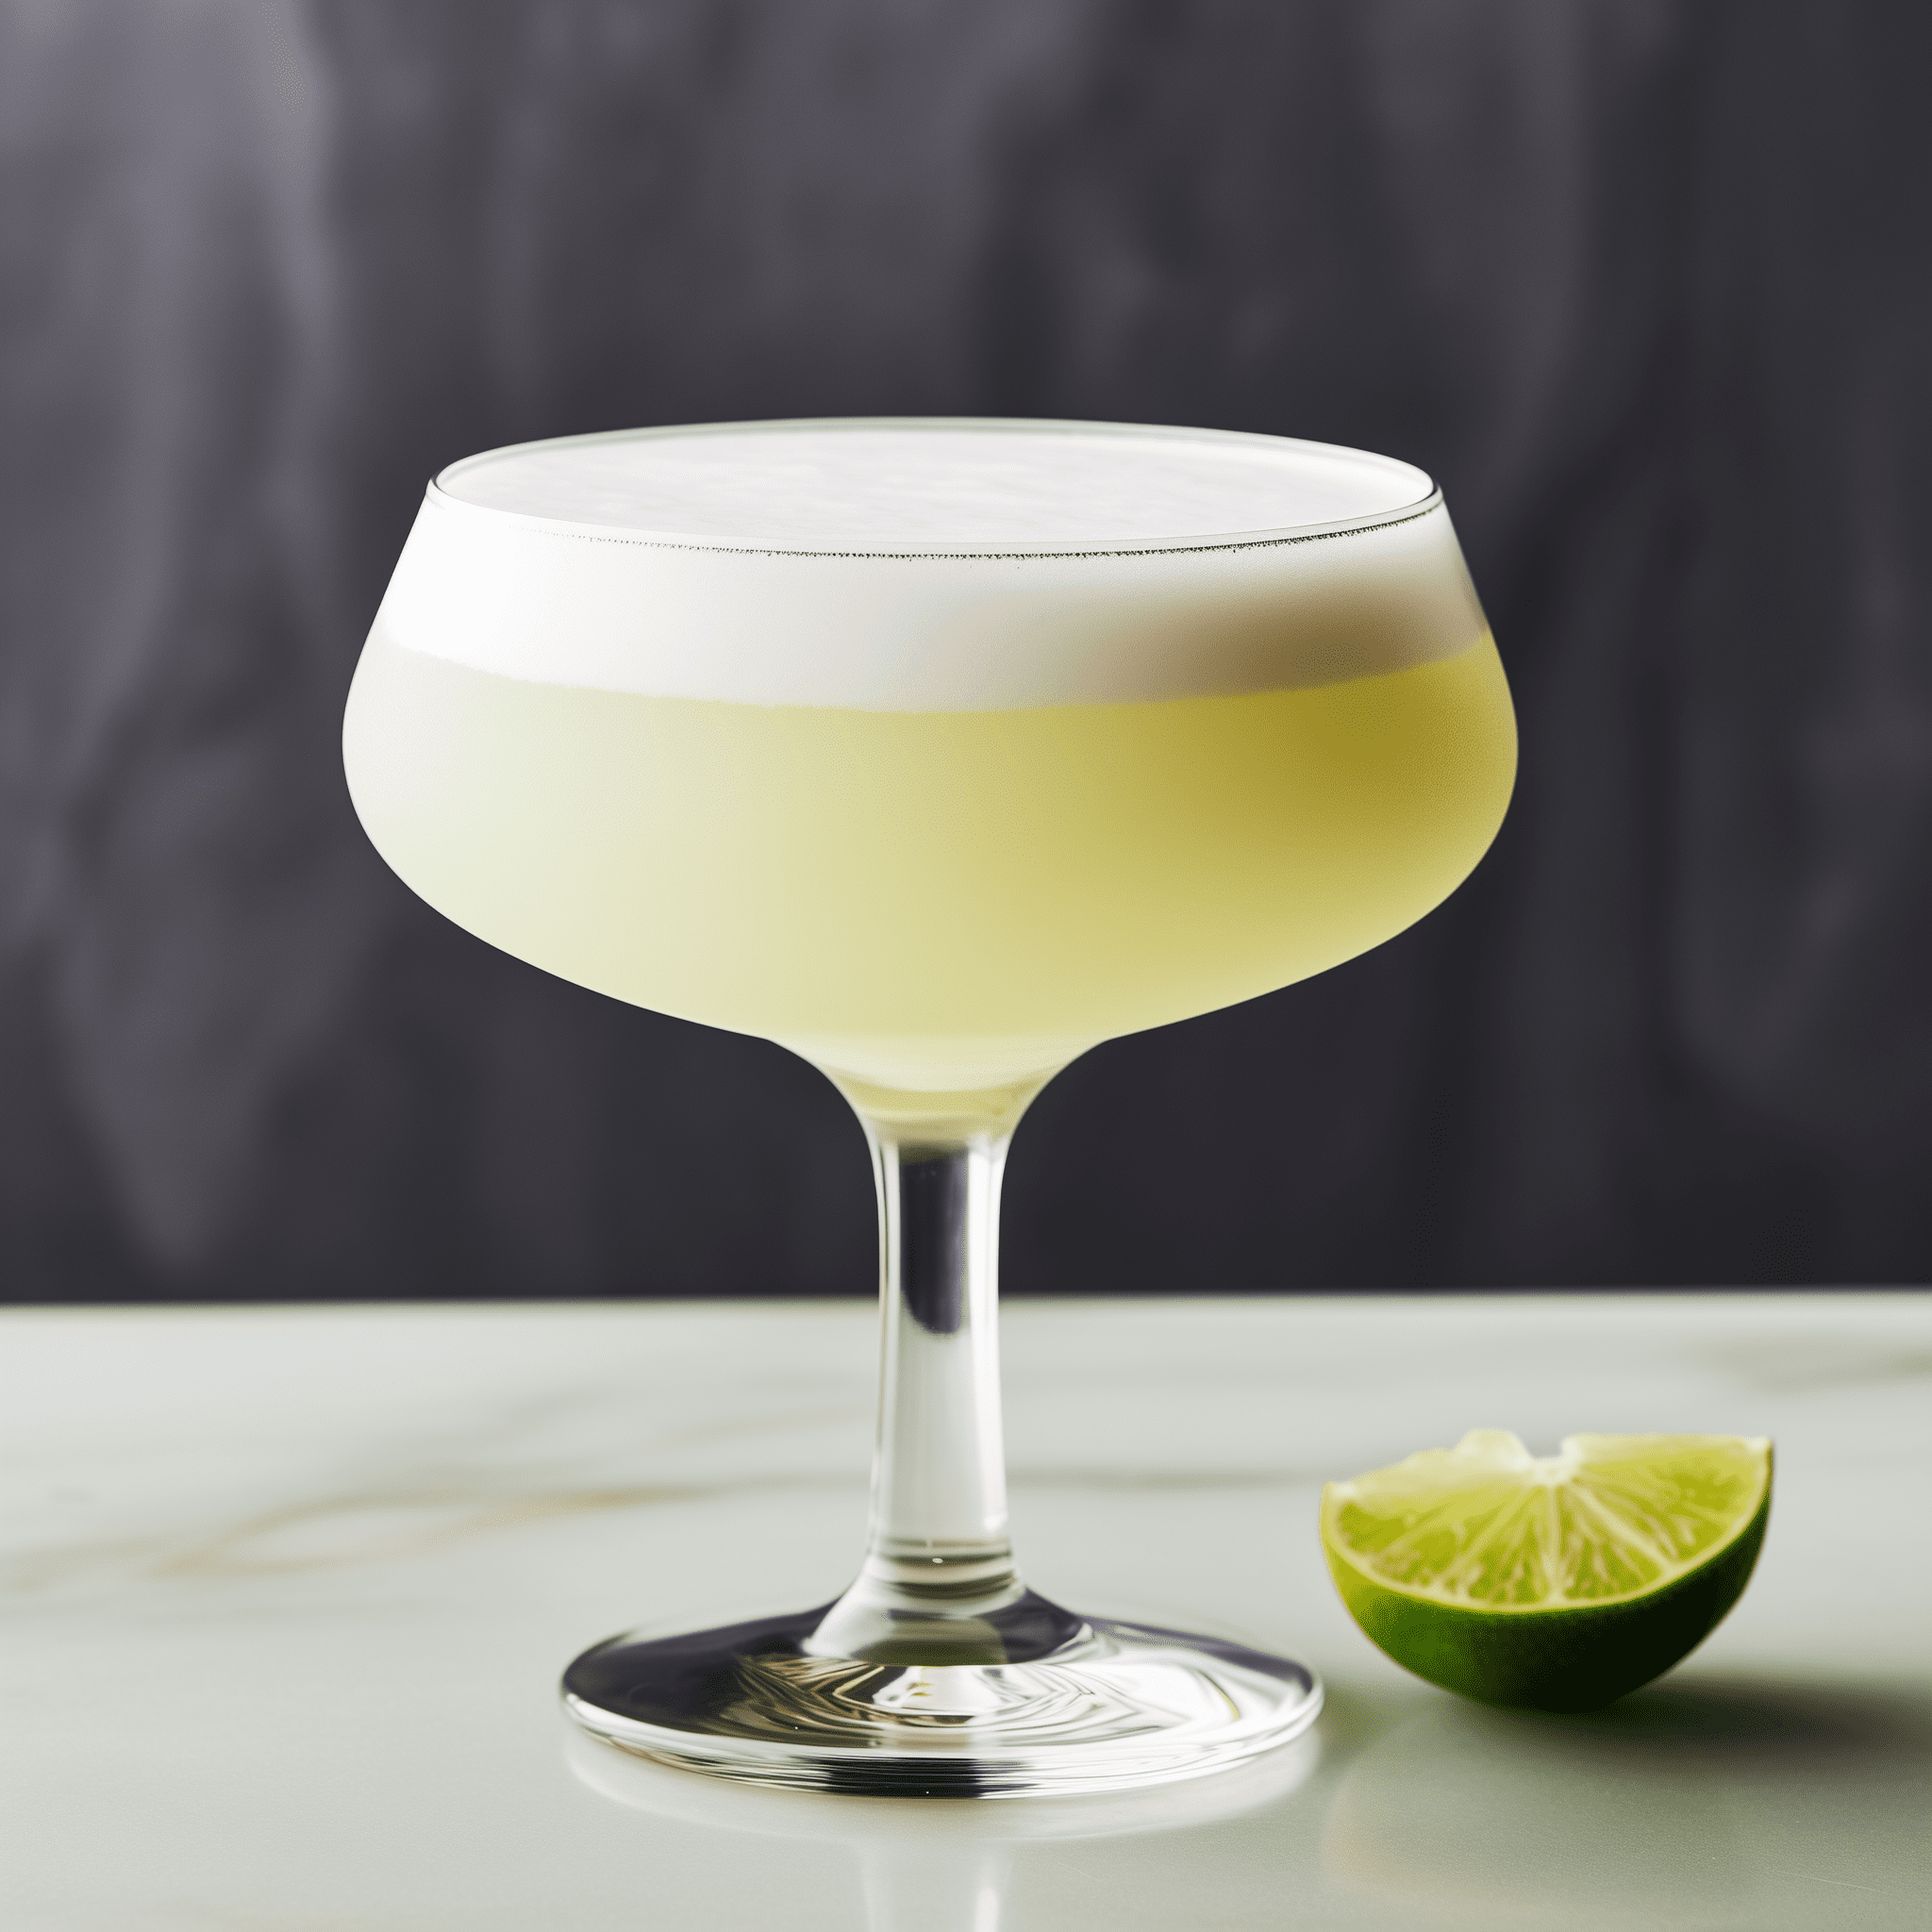 Guaro Sour Cocktail Recipe - The Guaro Sour offers a delightful balance of sweet and sour flavors, with a robust kick from the guaro. It's refreshing, citrus-forward, and has a smooth finish that lingers pleasantly on the palate.